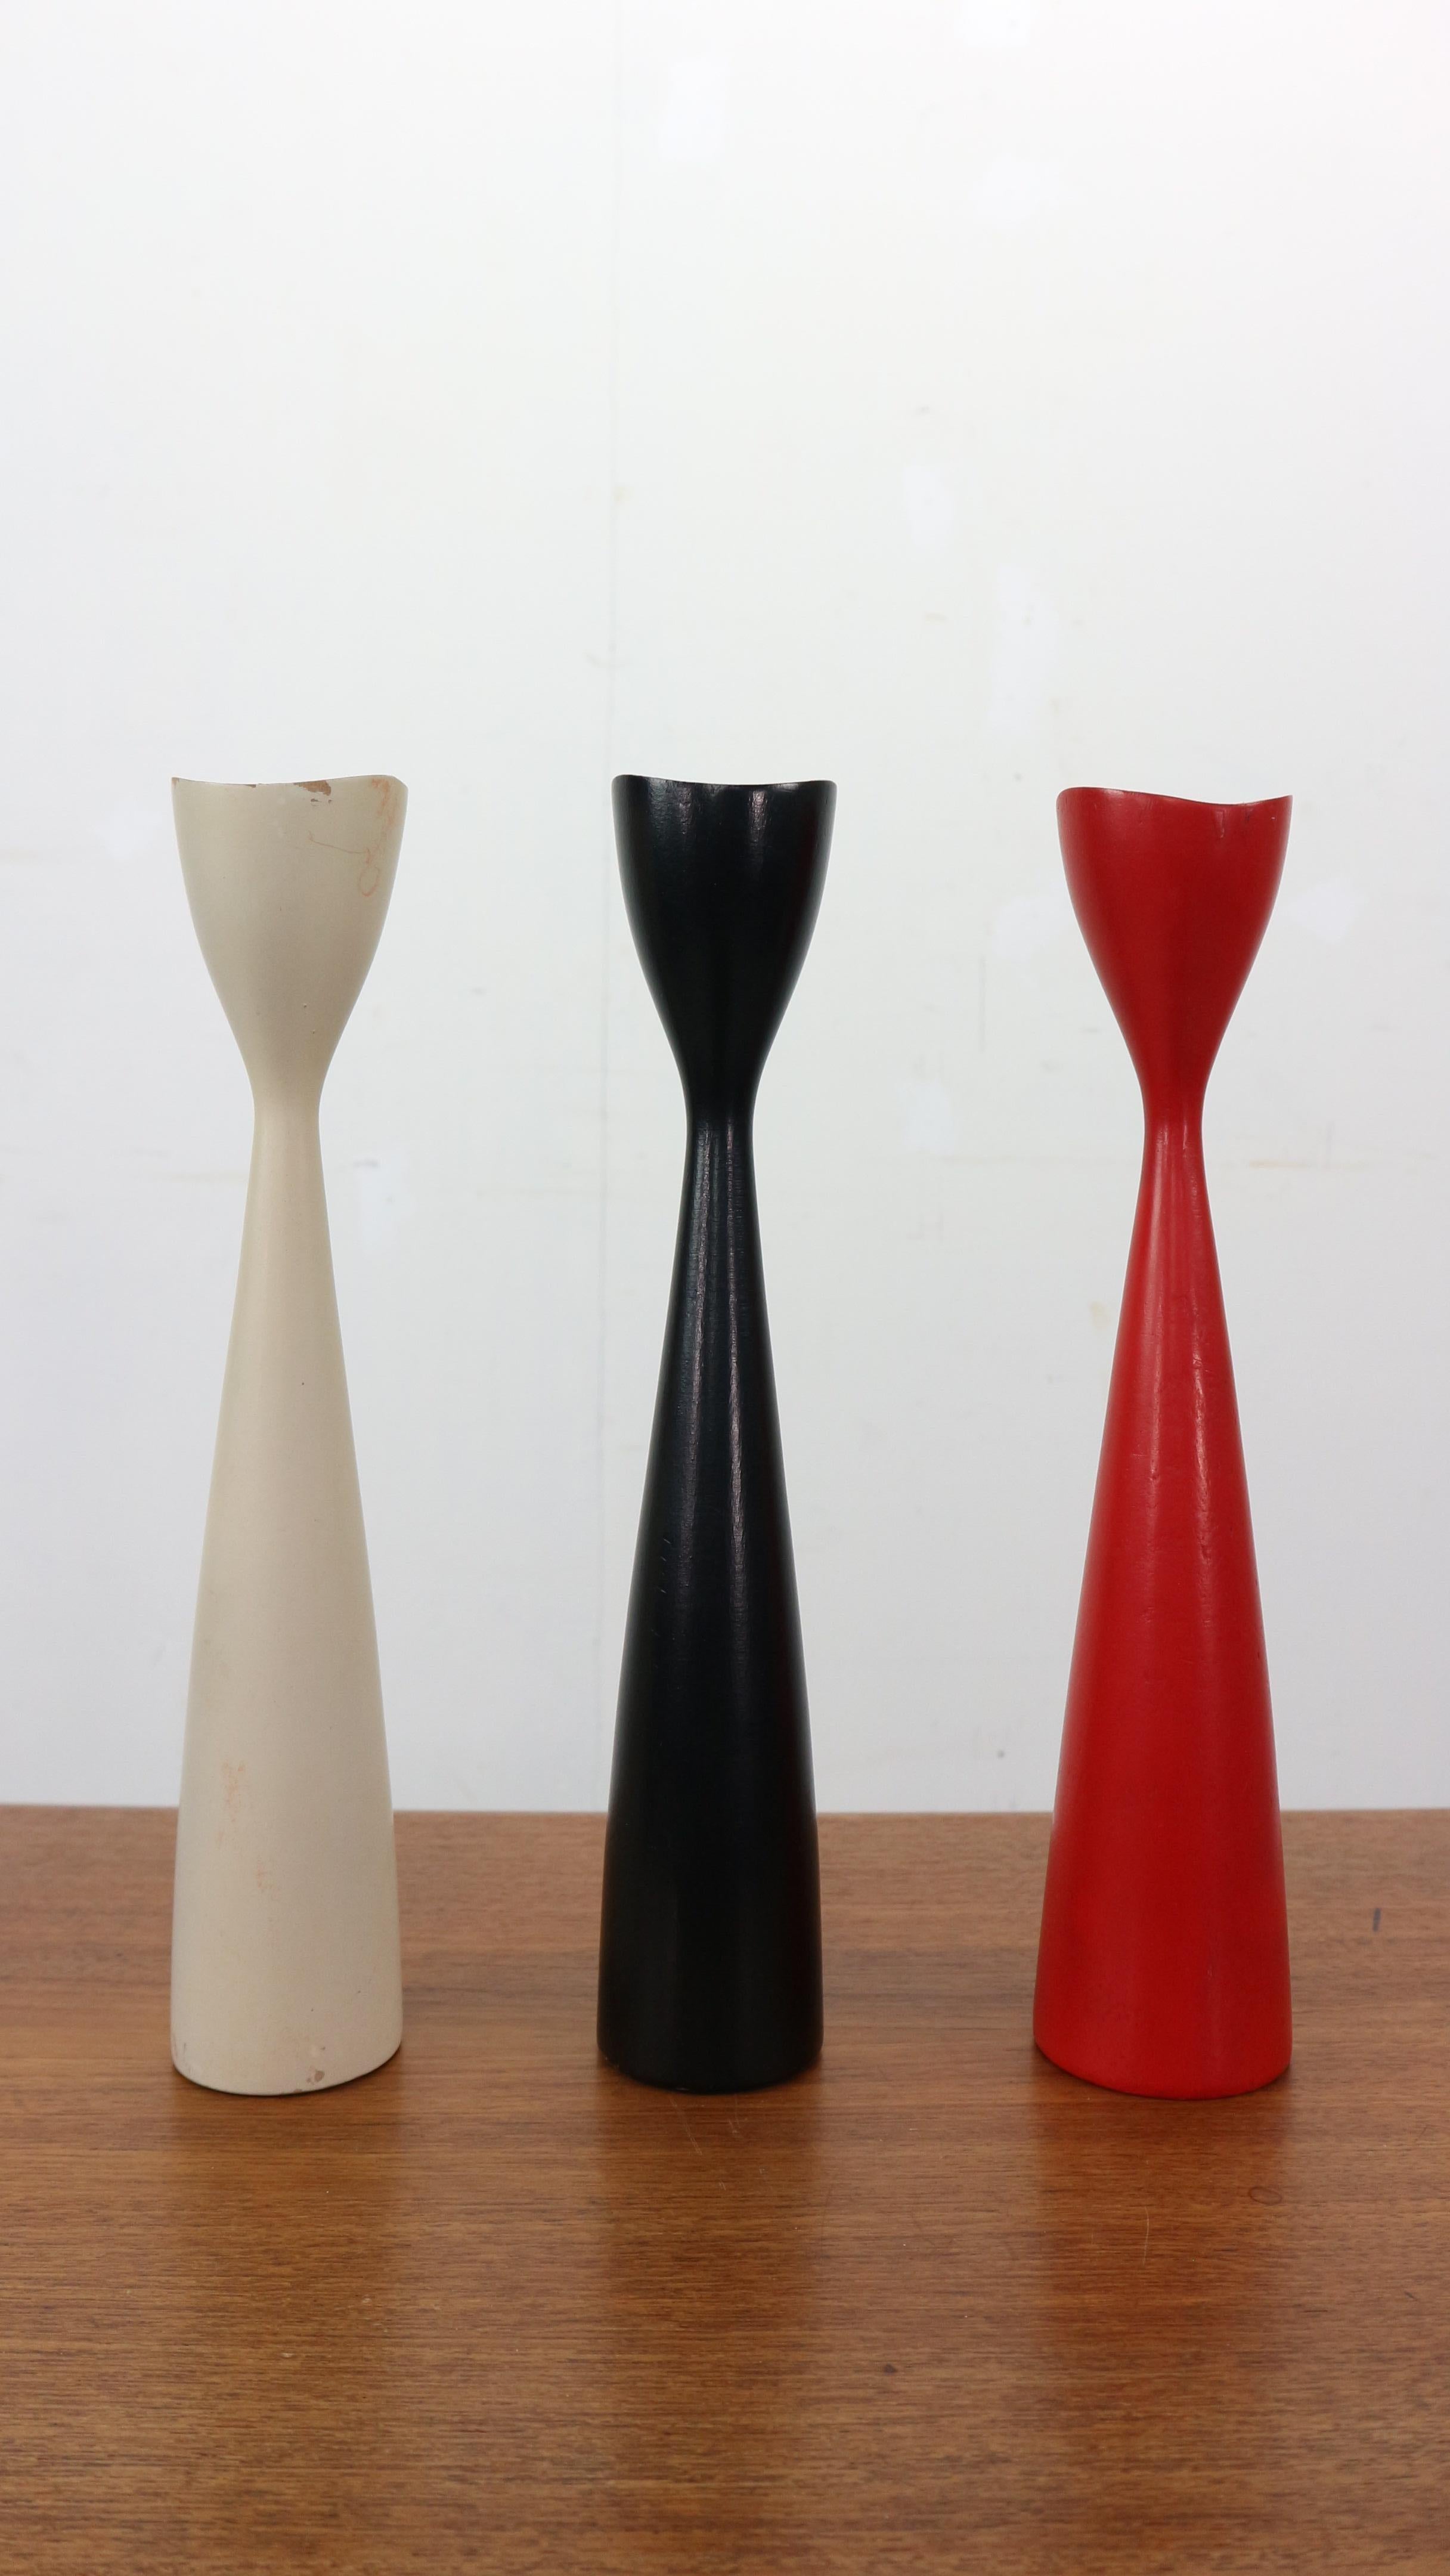 Set of 3 Candlesticks by Brdr Bonfils of Denmark, 1960s.
Organically shaped and very decorative design object.
Marked by the maker and designed in Denmark.
